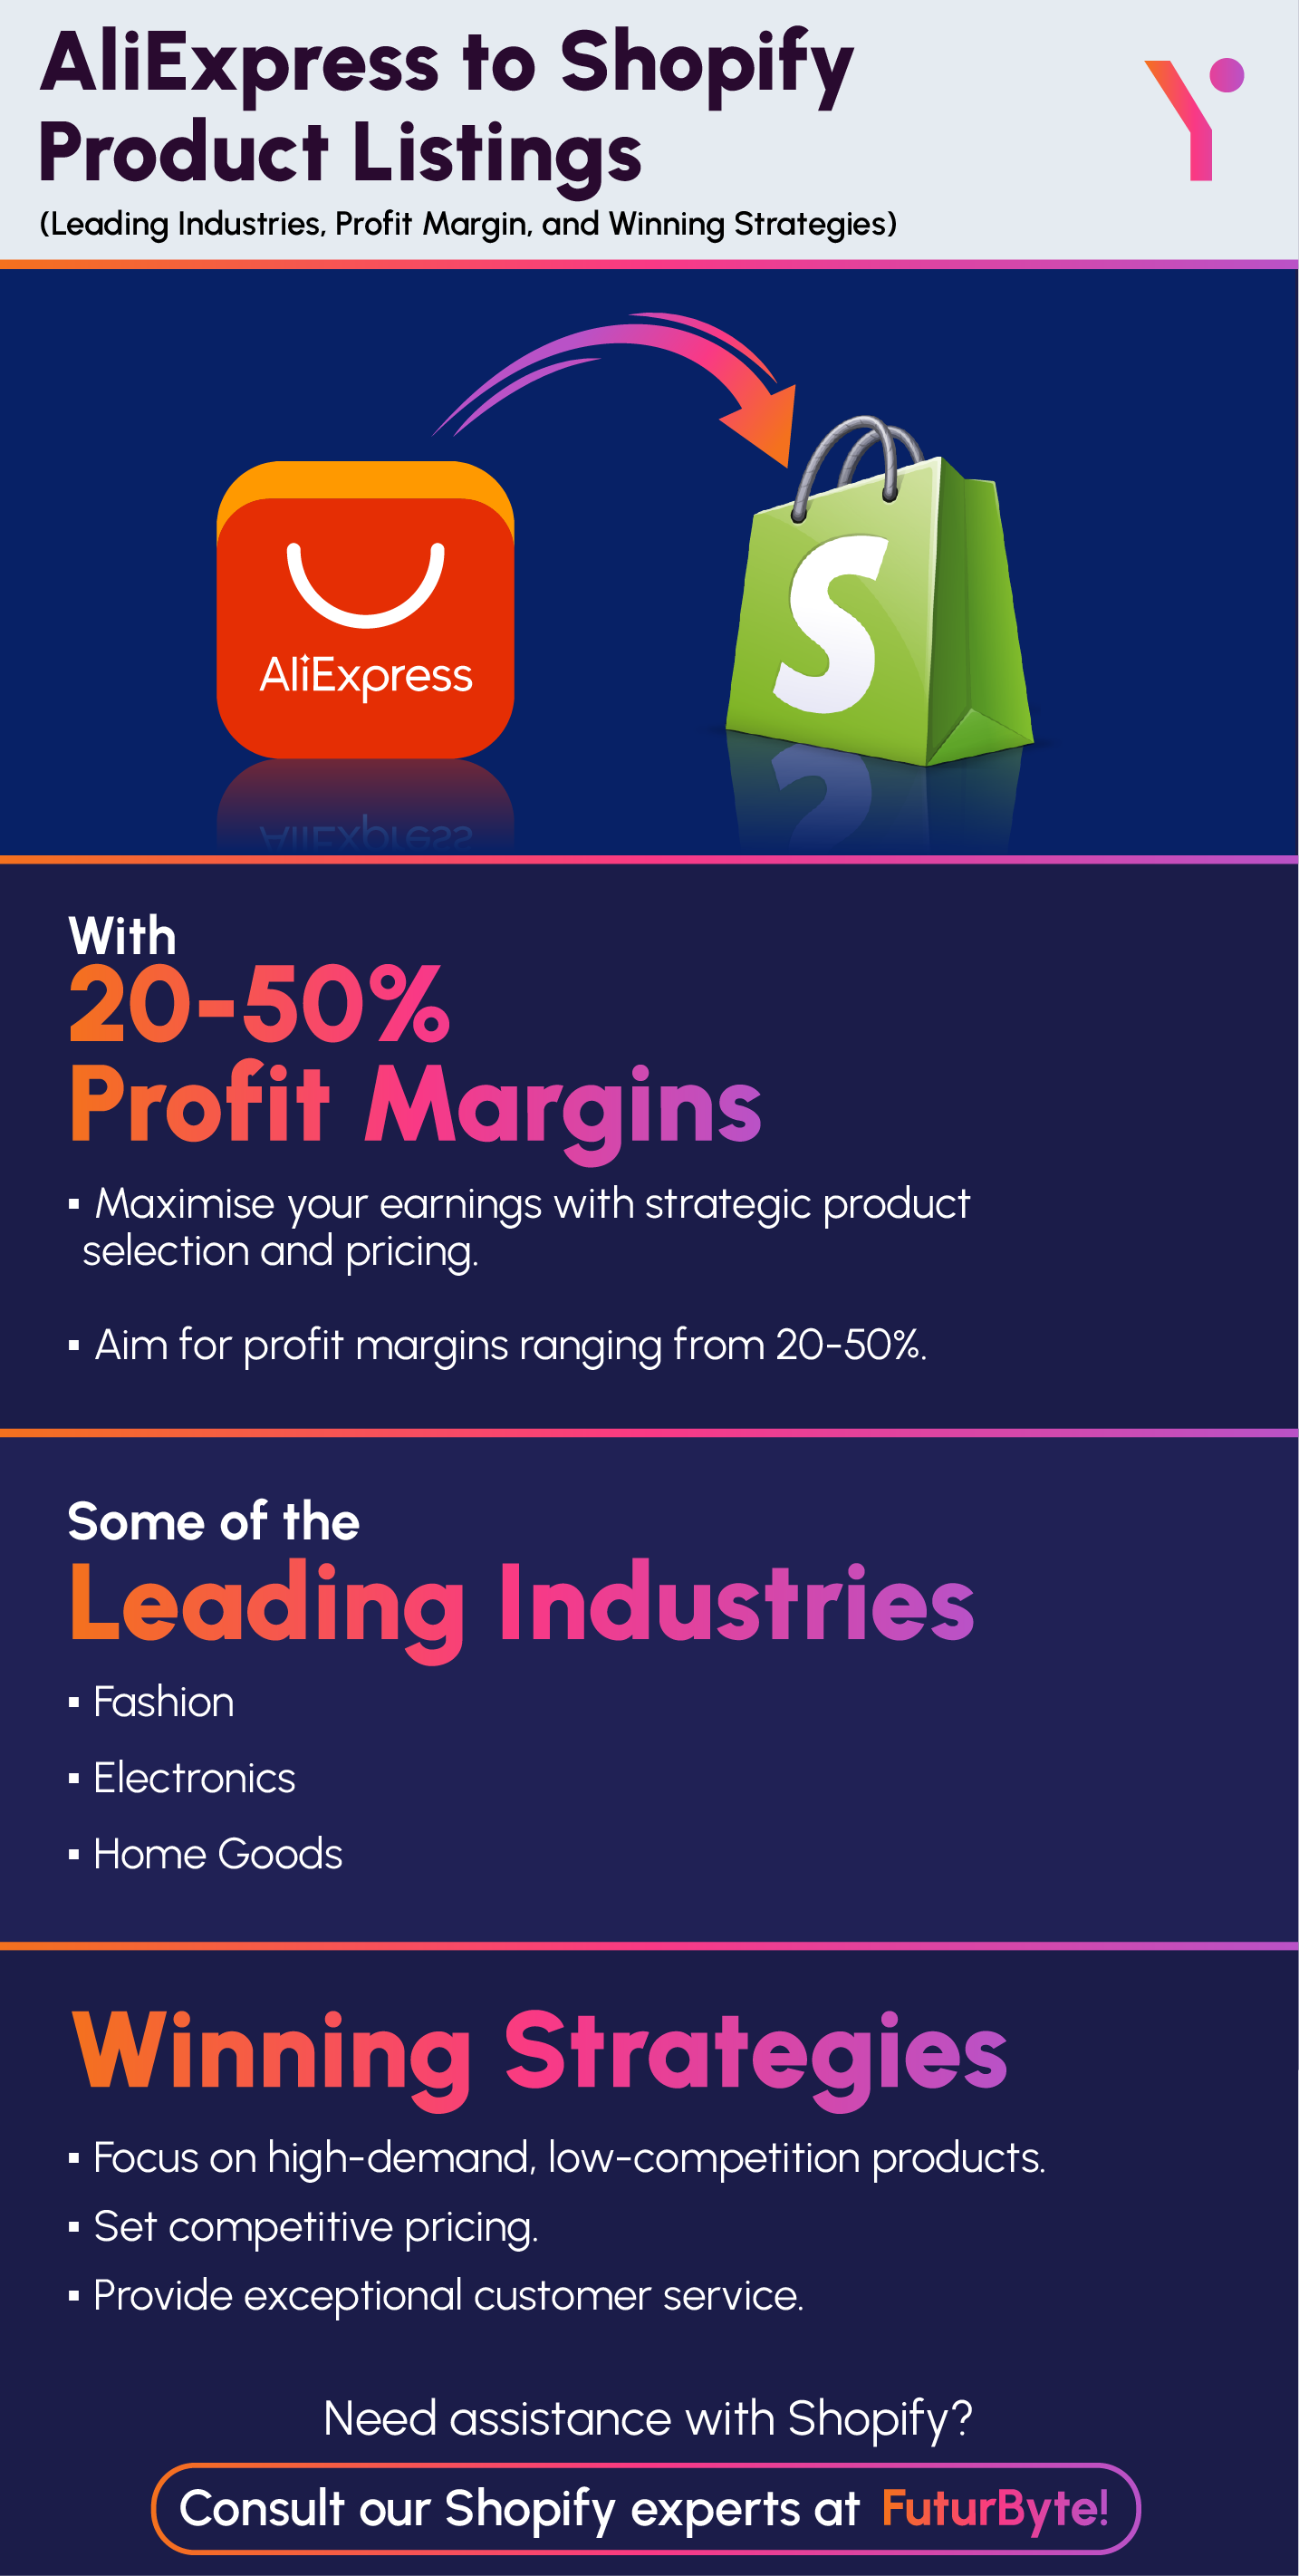 Key pointers of How To Import Products From AliExpress to Shopify in easy steps in infographic form